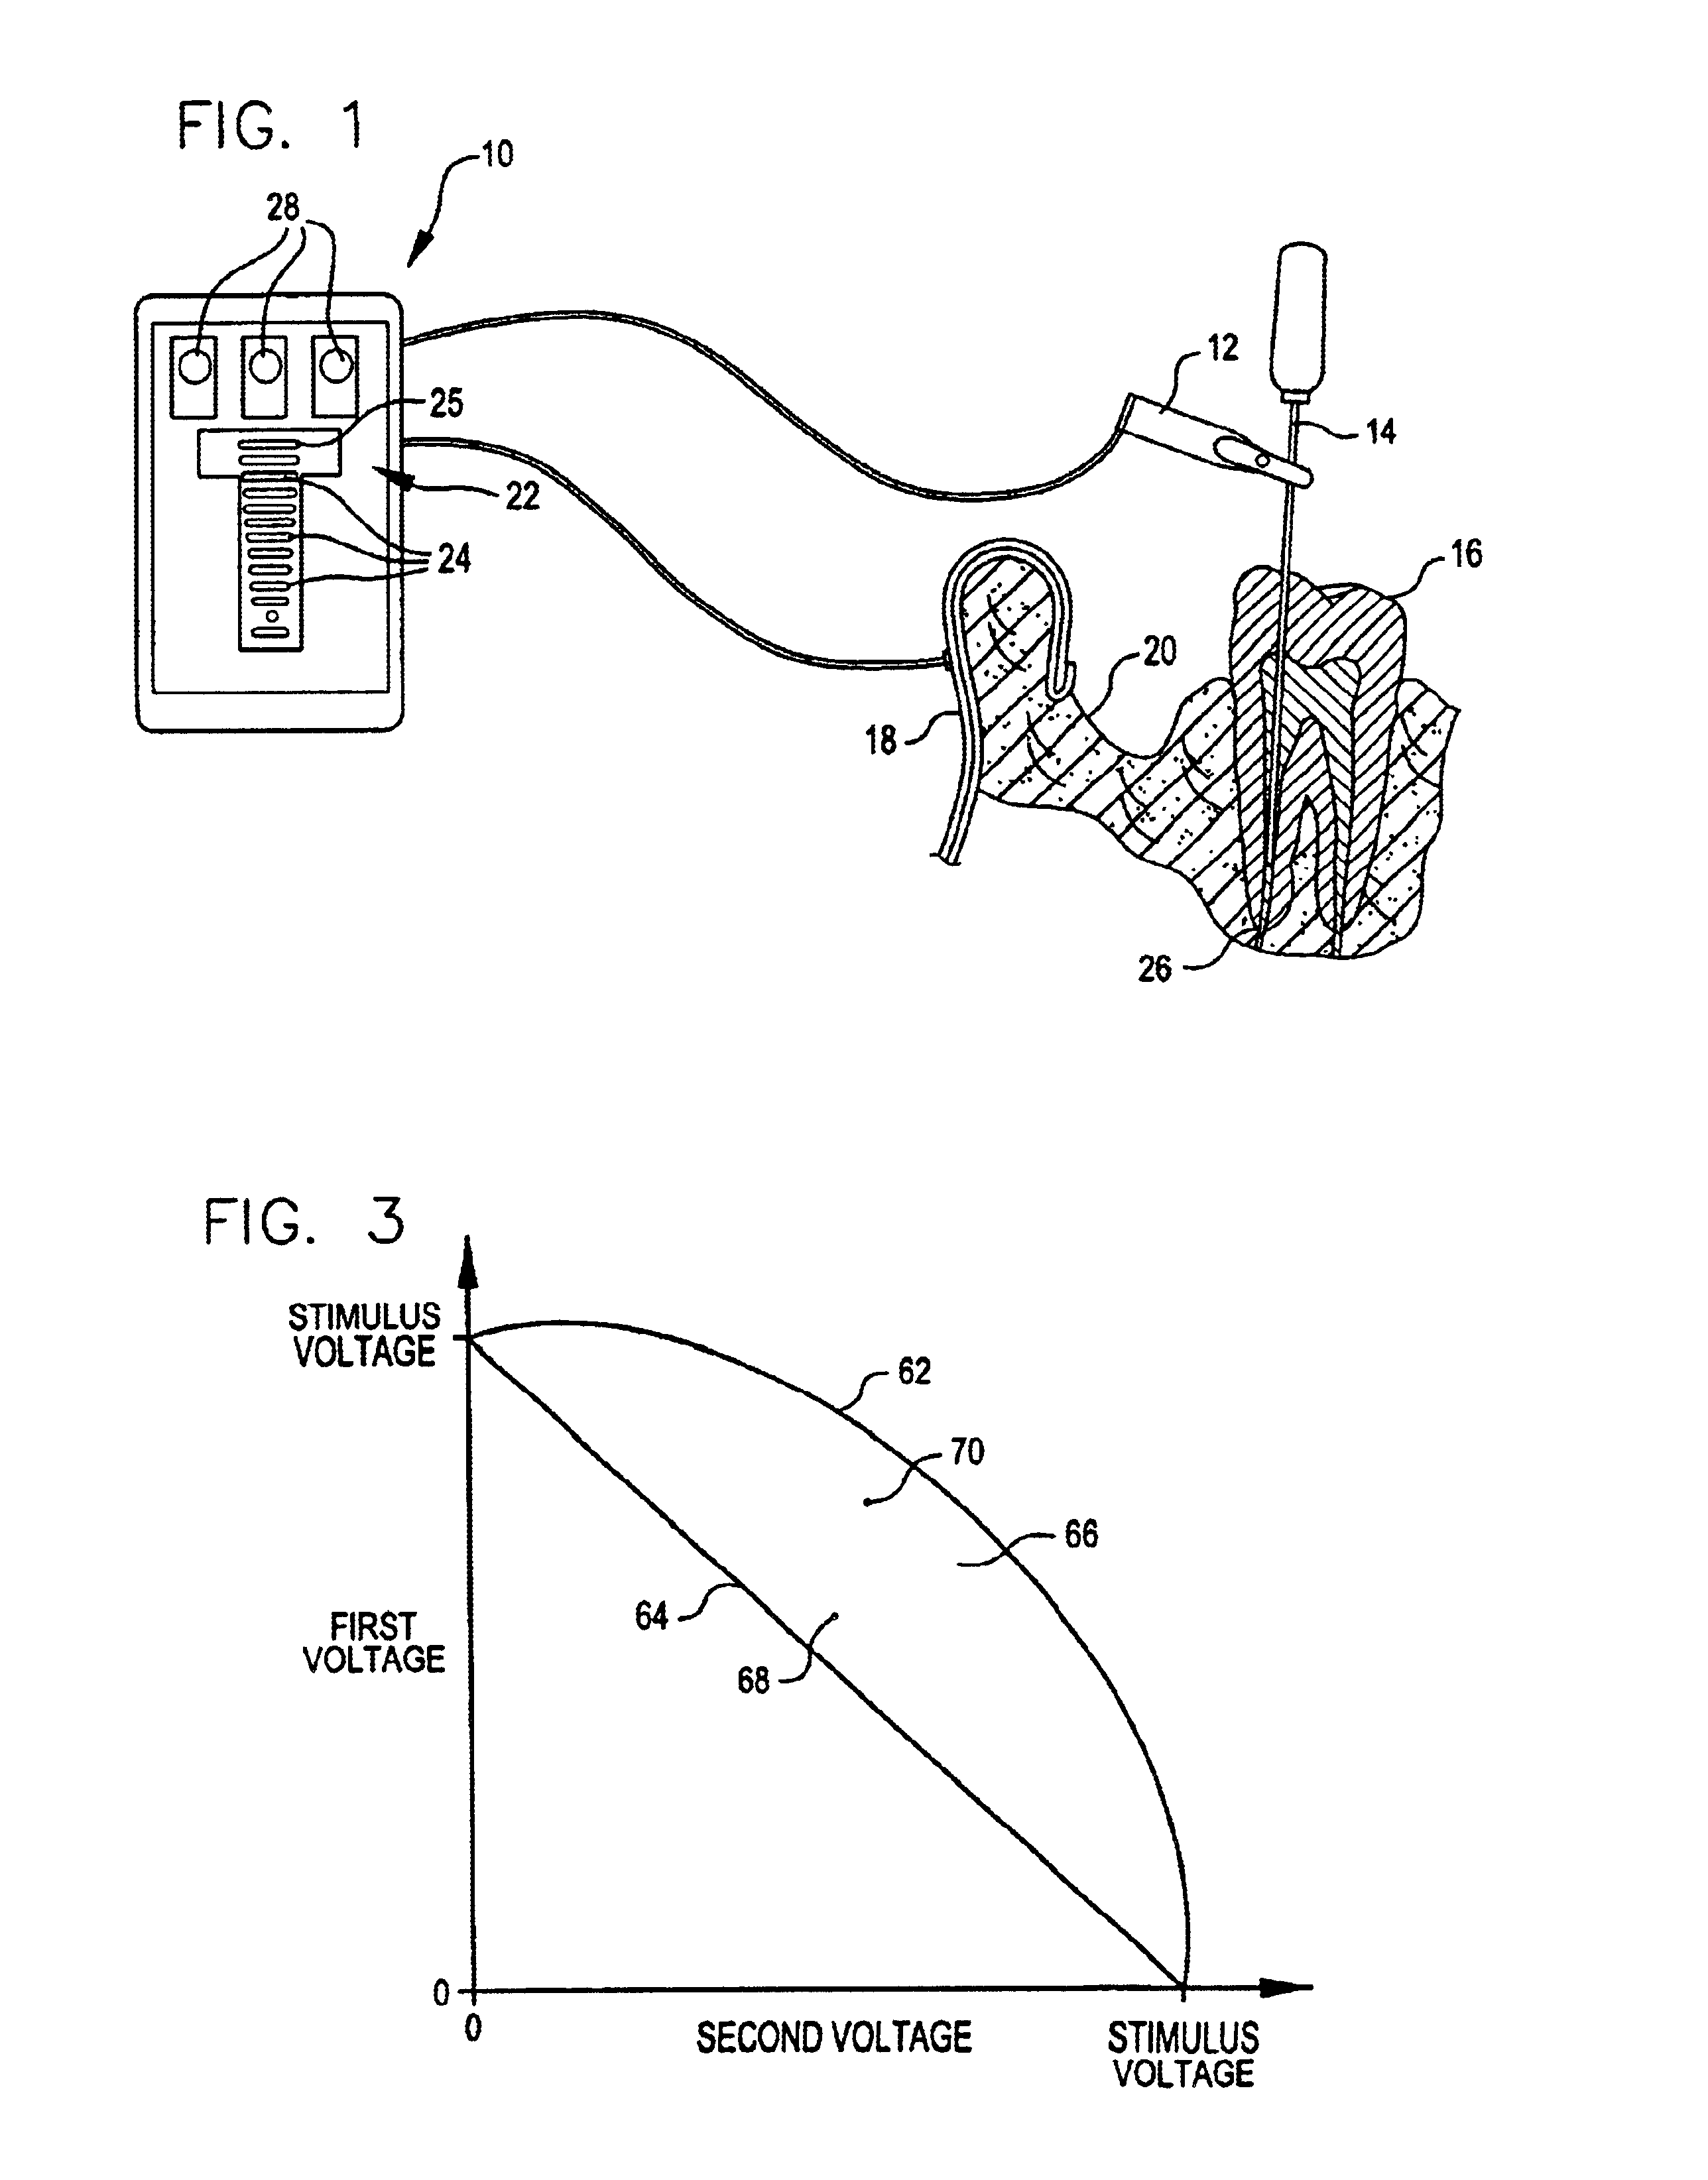 Systems and methods for locating a tooth's apical foramen